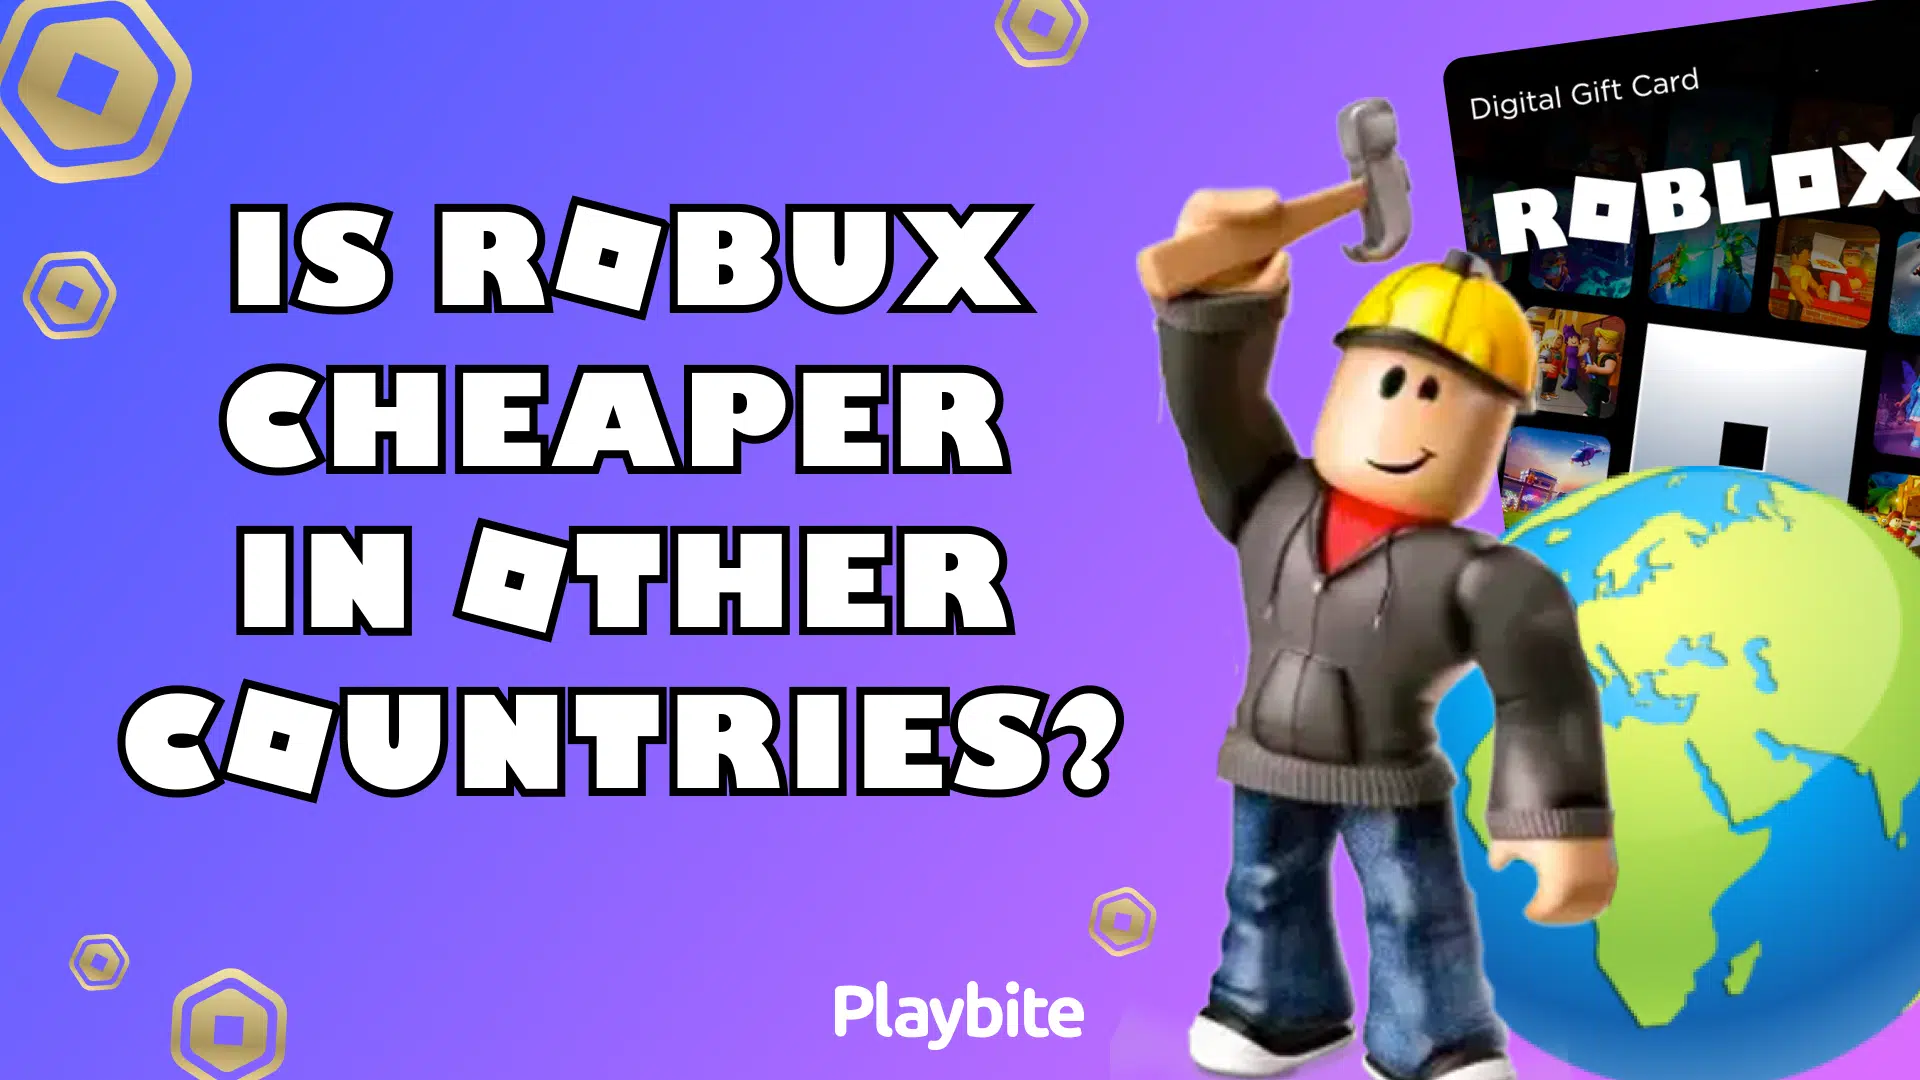 Do You Actually Get Robux From Pls Donate? - Playbite